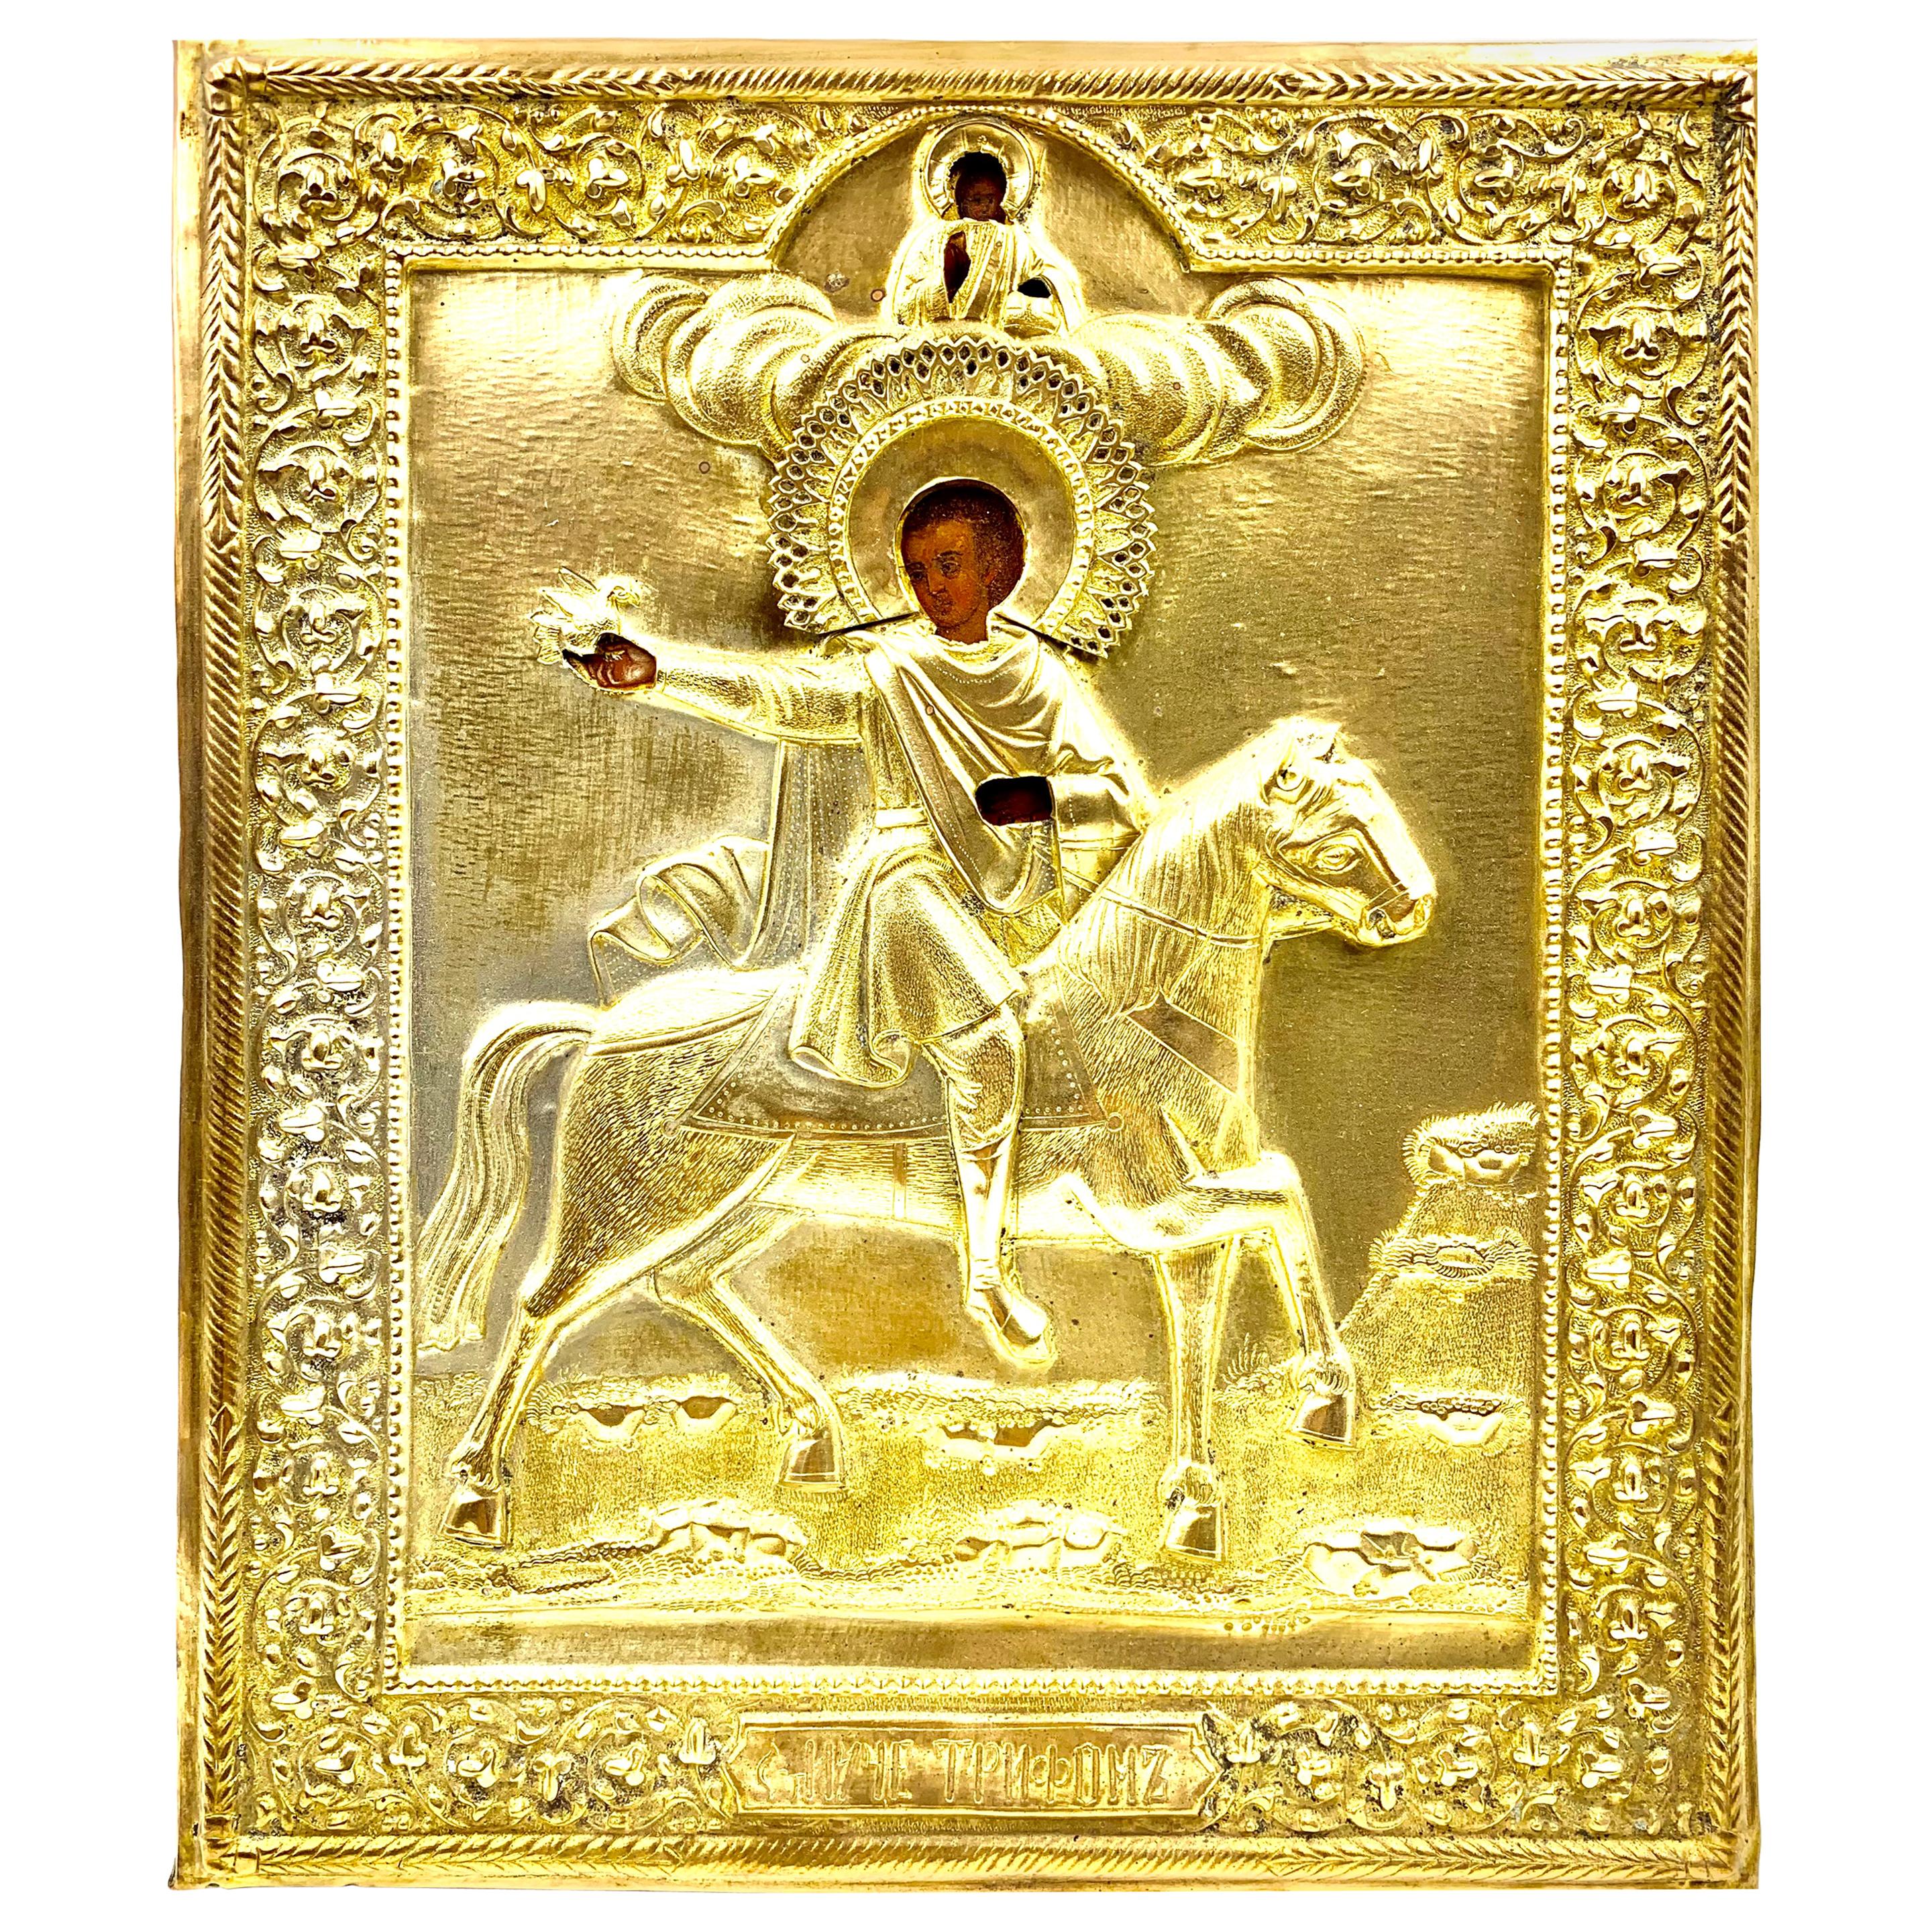 Rare Antique Russian Icon Saint Tryphon, Patron Saint of Wine Growers, Falconers For Sale